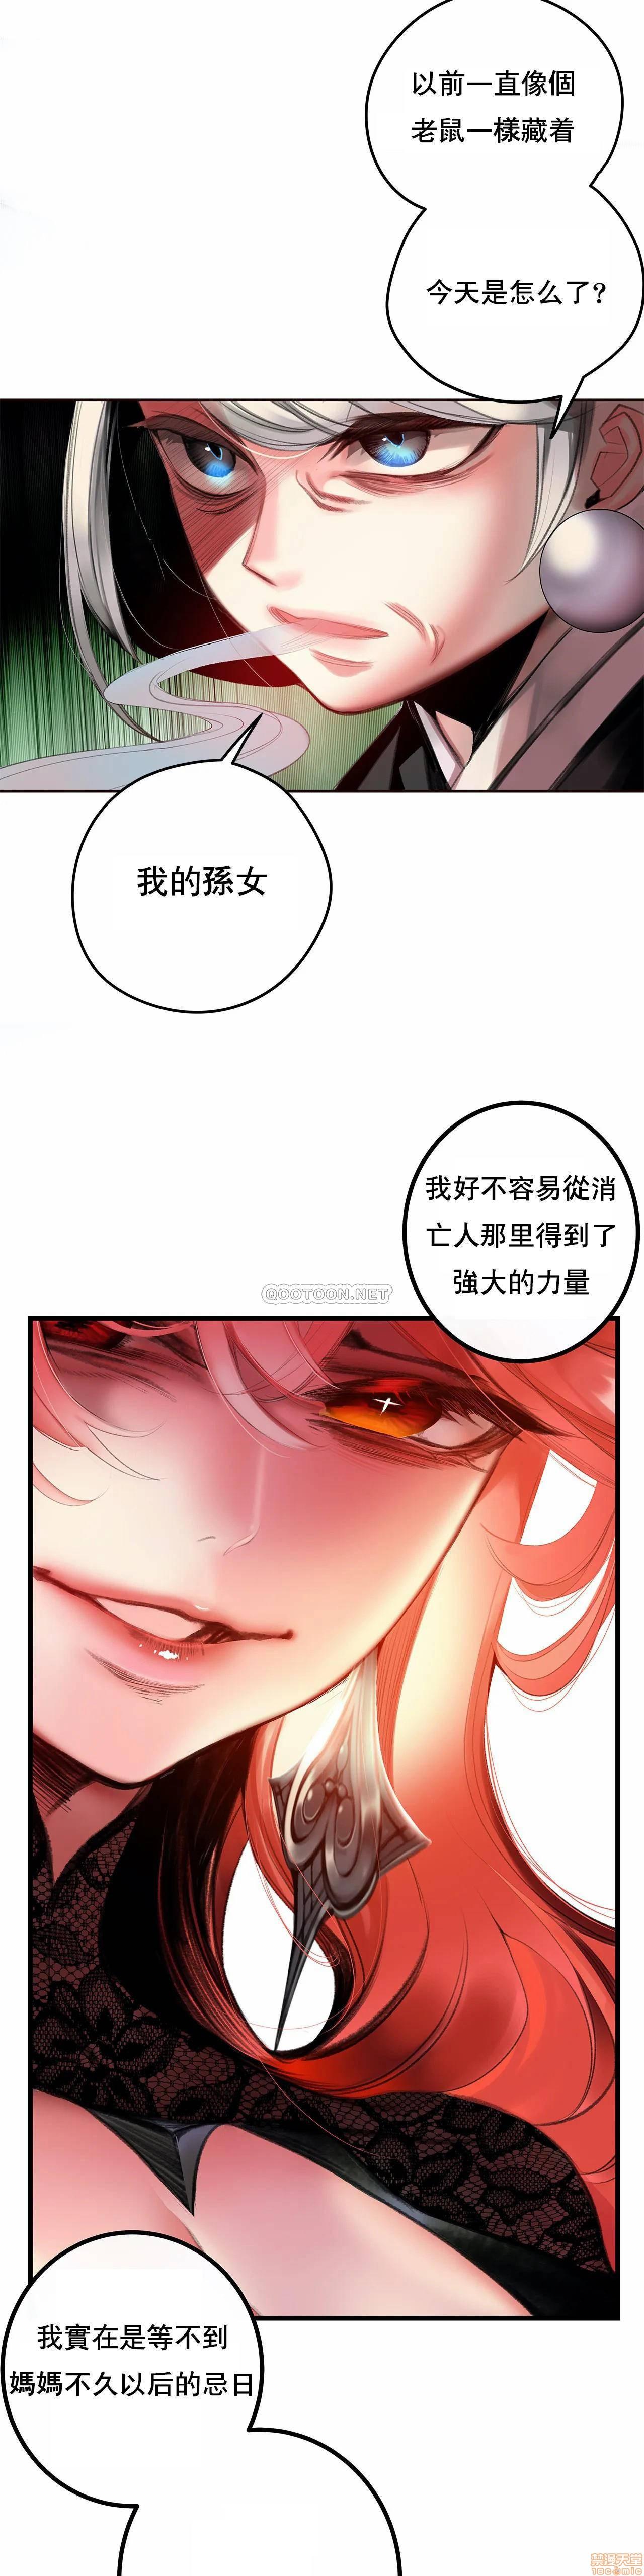 [Juder] Lilith`s Cord (第二季) Ch.77-93 end [Chinese] 192